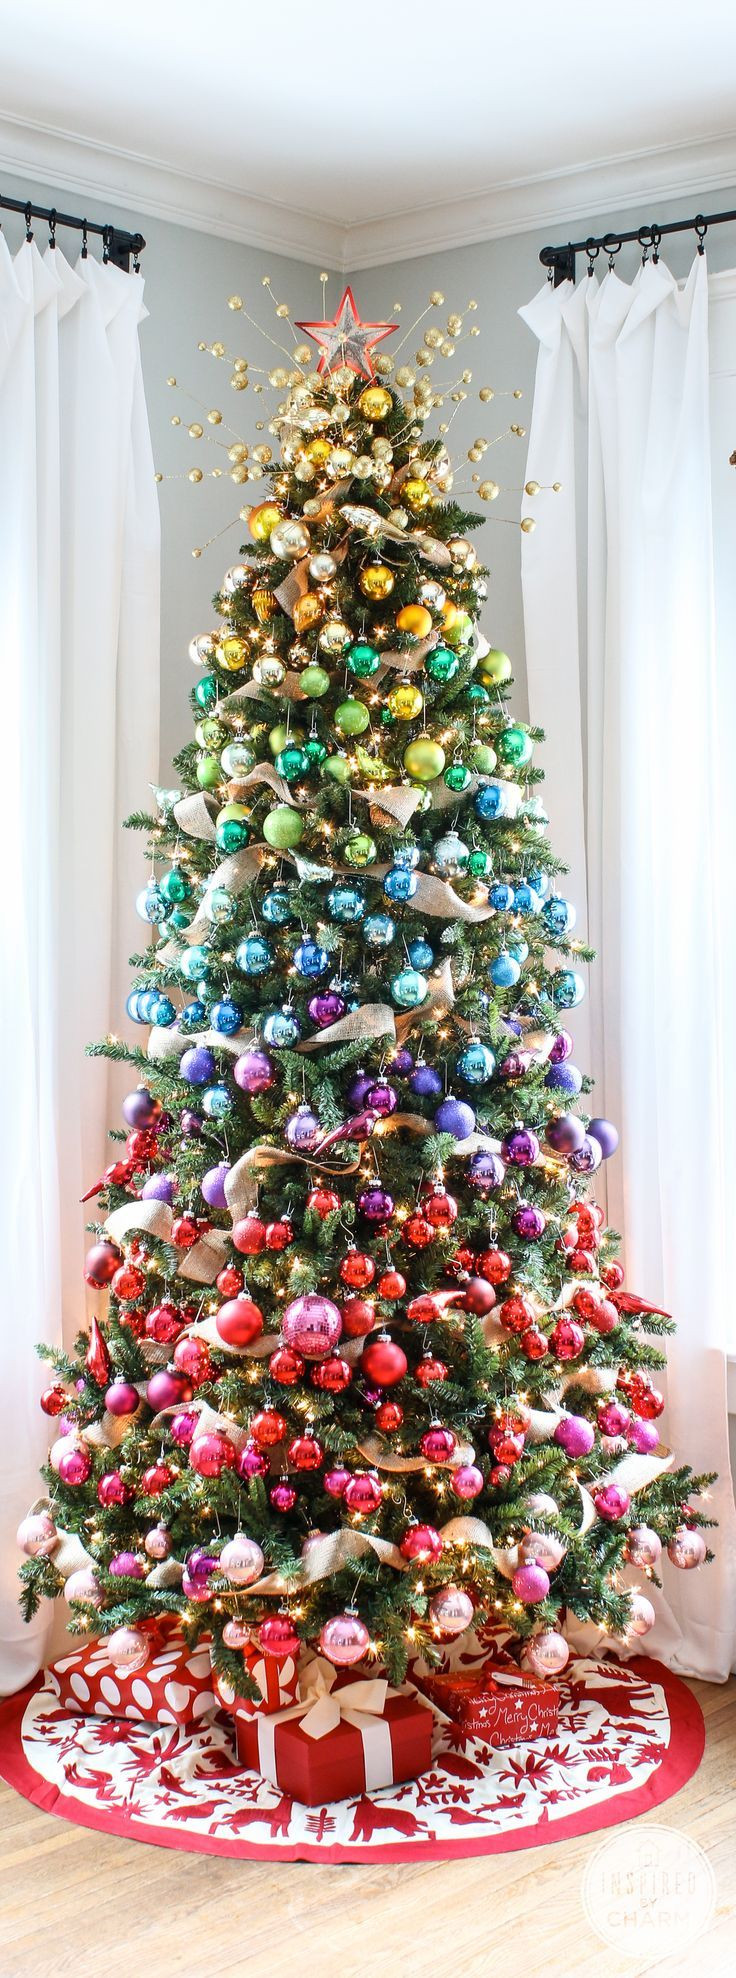 DIY Christmas Trees
 DIY Unique Christmas Trees Ideas You Should Try This Year